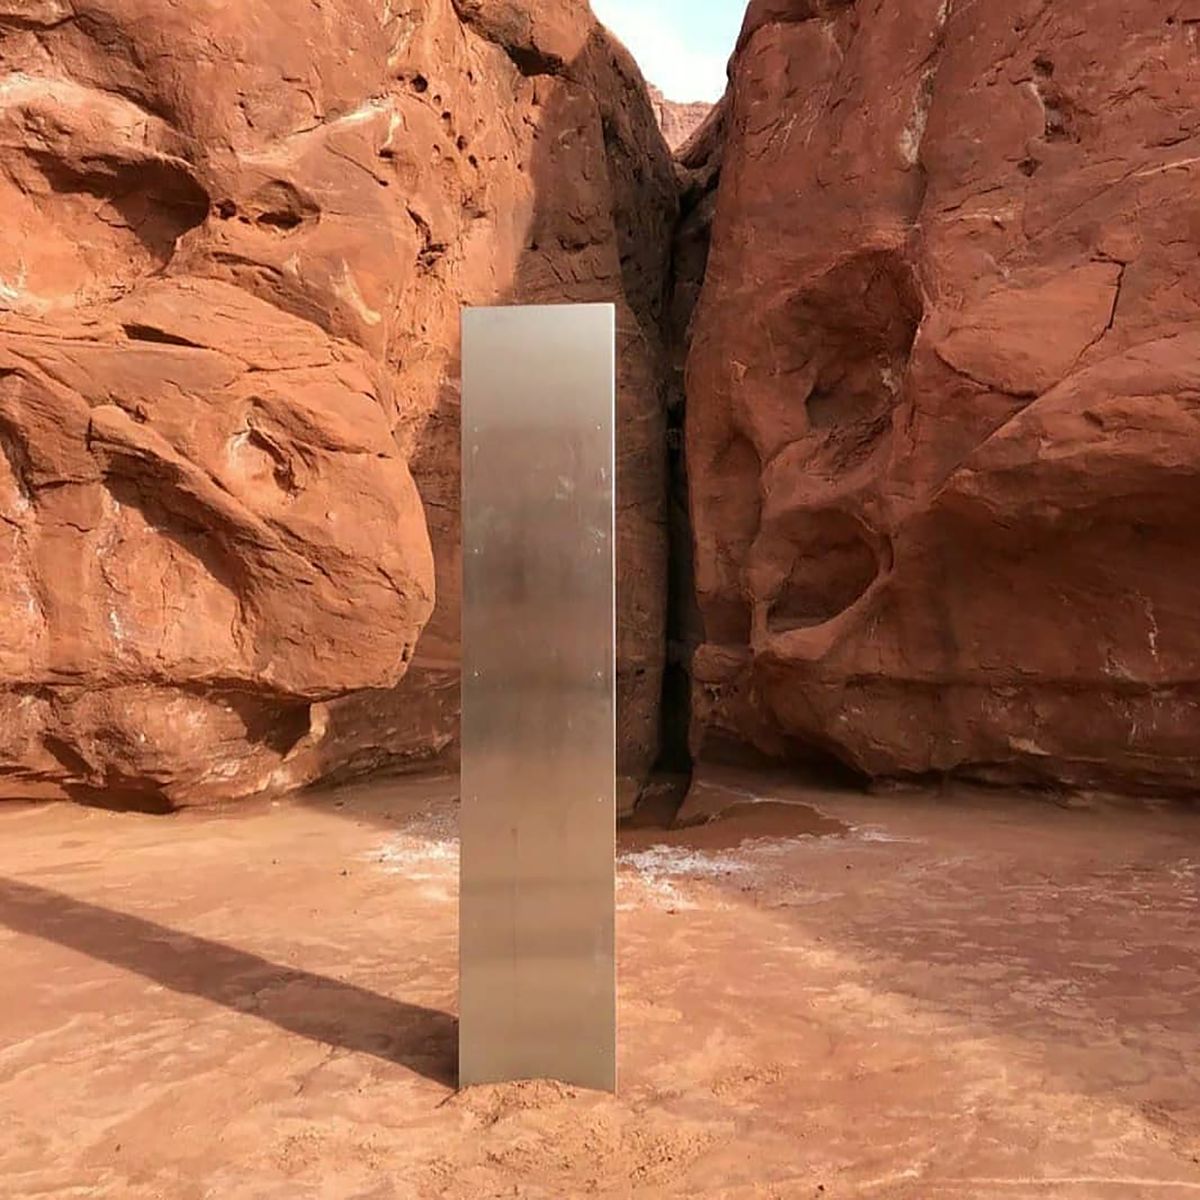 This Nov. 18, 2020 photo provided by the Utah Department of Public Safety shows a metal monolith installed in the ground in a remote area of red rock in Utah. The smooth, tall structure was found during a helicopter survey of bighorn sheep in southeastern Utah, officials said Monday. State workers from the Utah Department of Public Safety and Division of Wildlife Resources spotted the gleaming object from the air and landed nearby to check it out. The exact location is so remote that officials are not revealing it publicly, worried that people might get lost or stranded trying to find it and need to be rescued.  (HOGP)